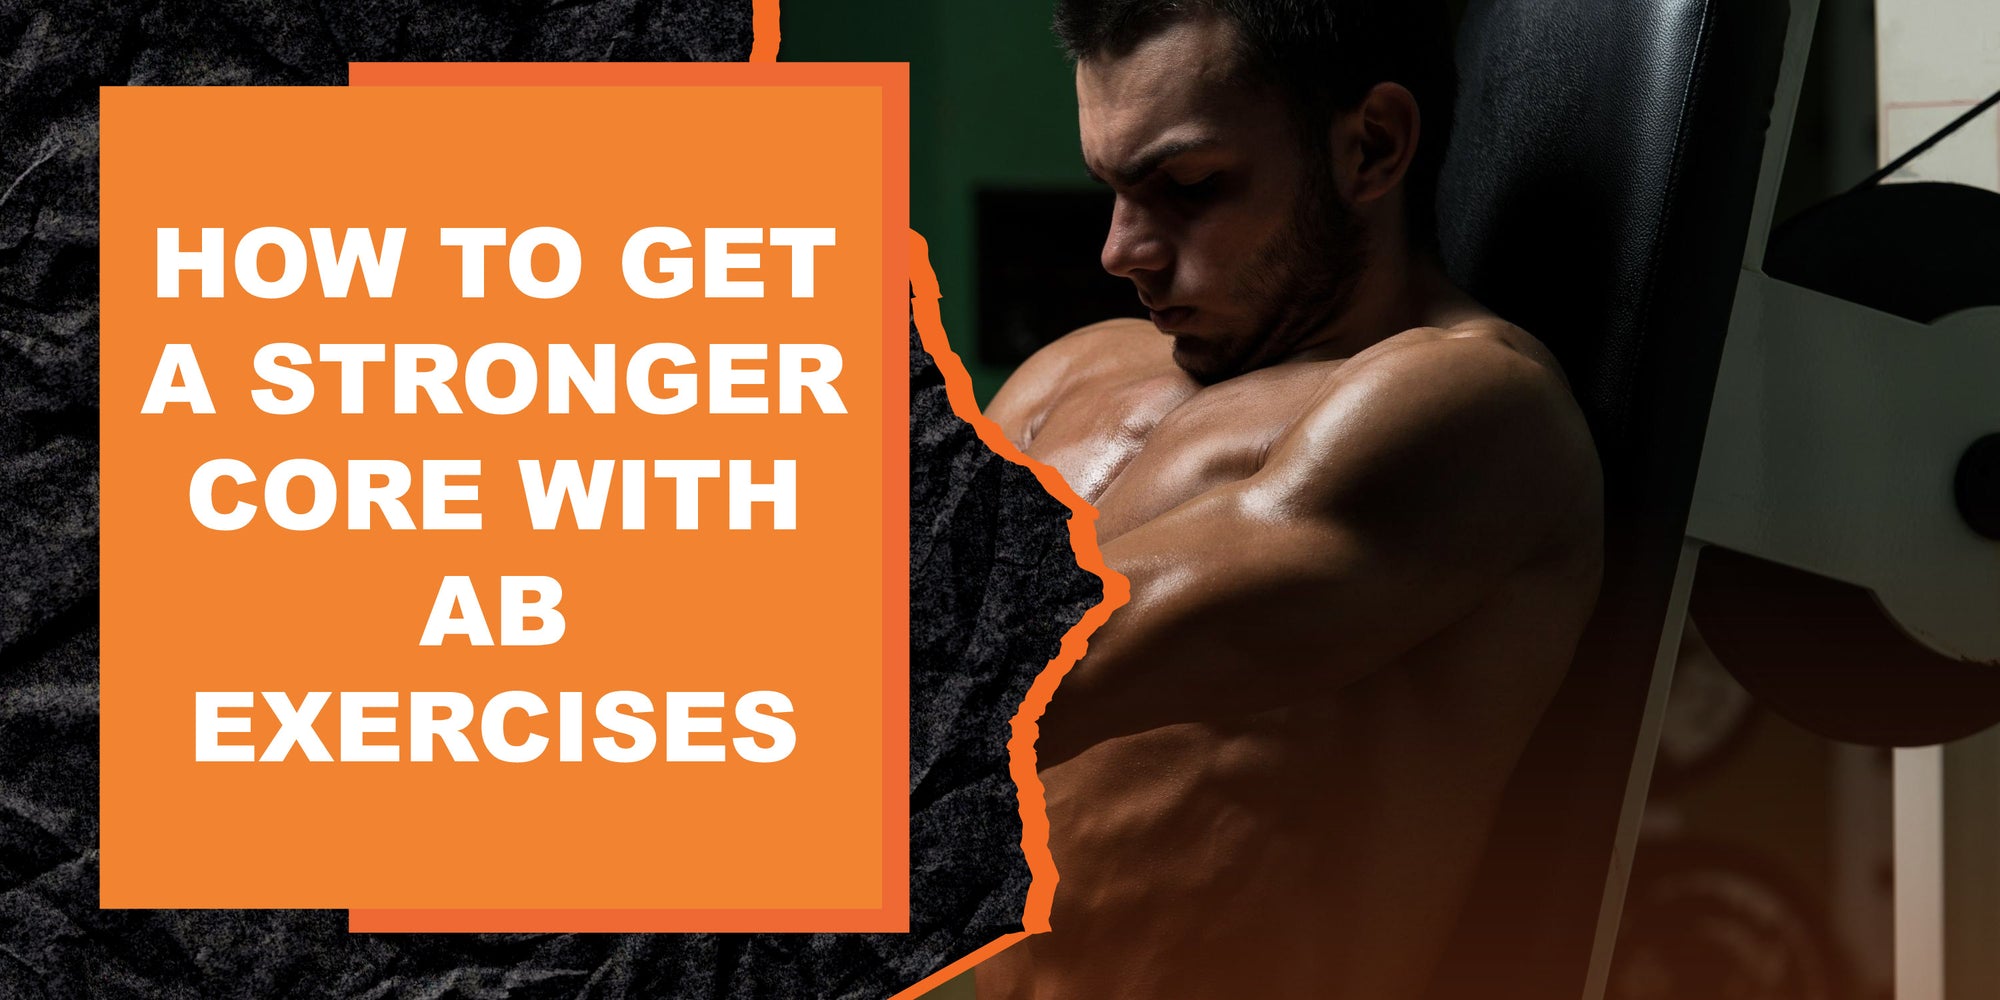 How to Get a Stronger Core with Ab Exercises